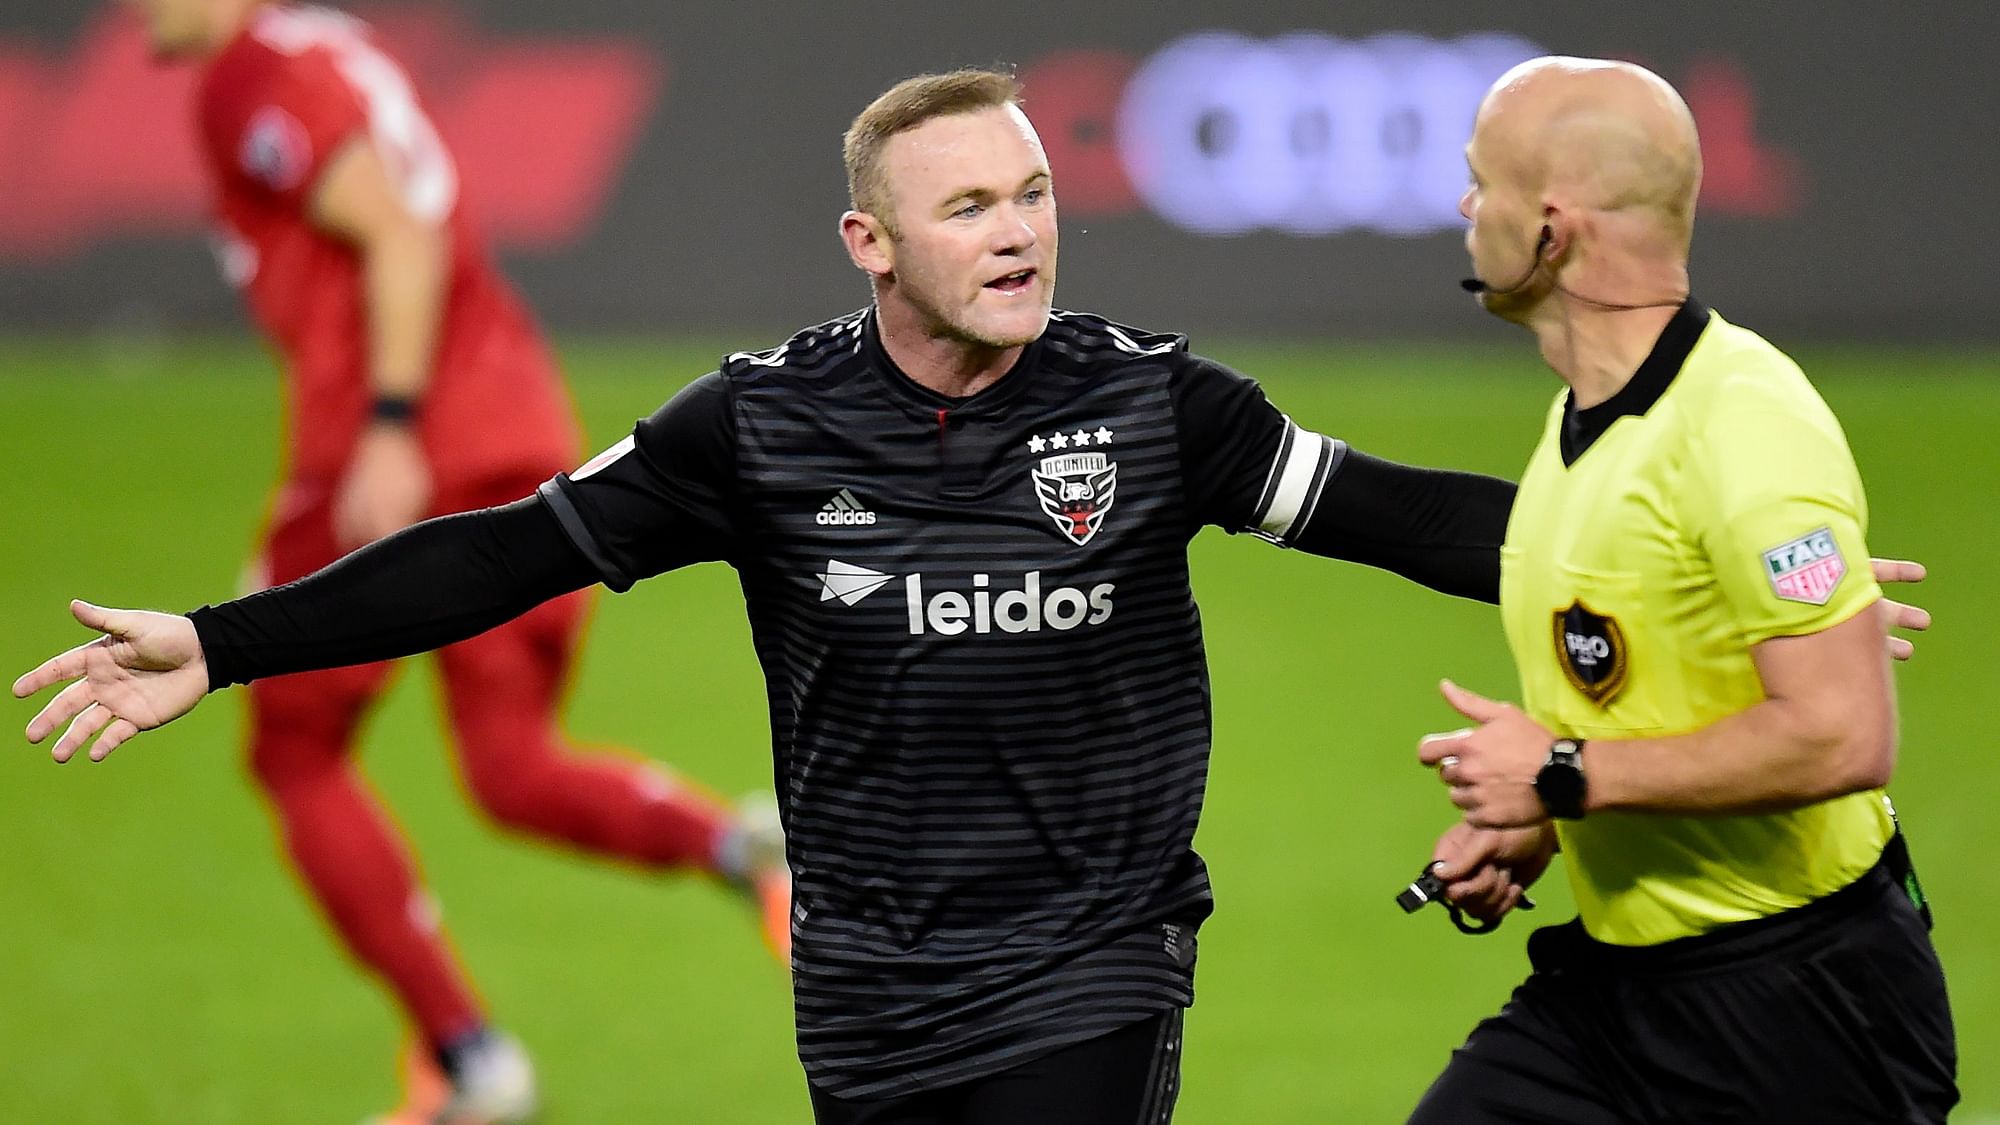 Toronto FC beat DC United 5-1 in the first round of the playoffs to end Wayne Rooney’s MLS career.